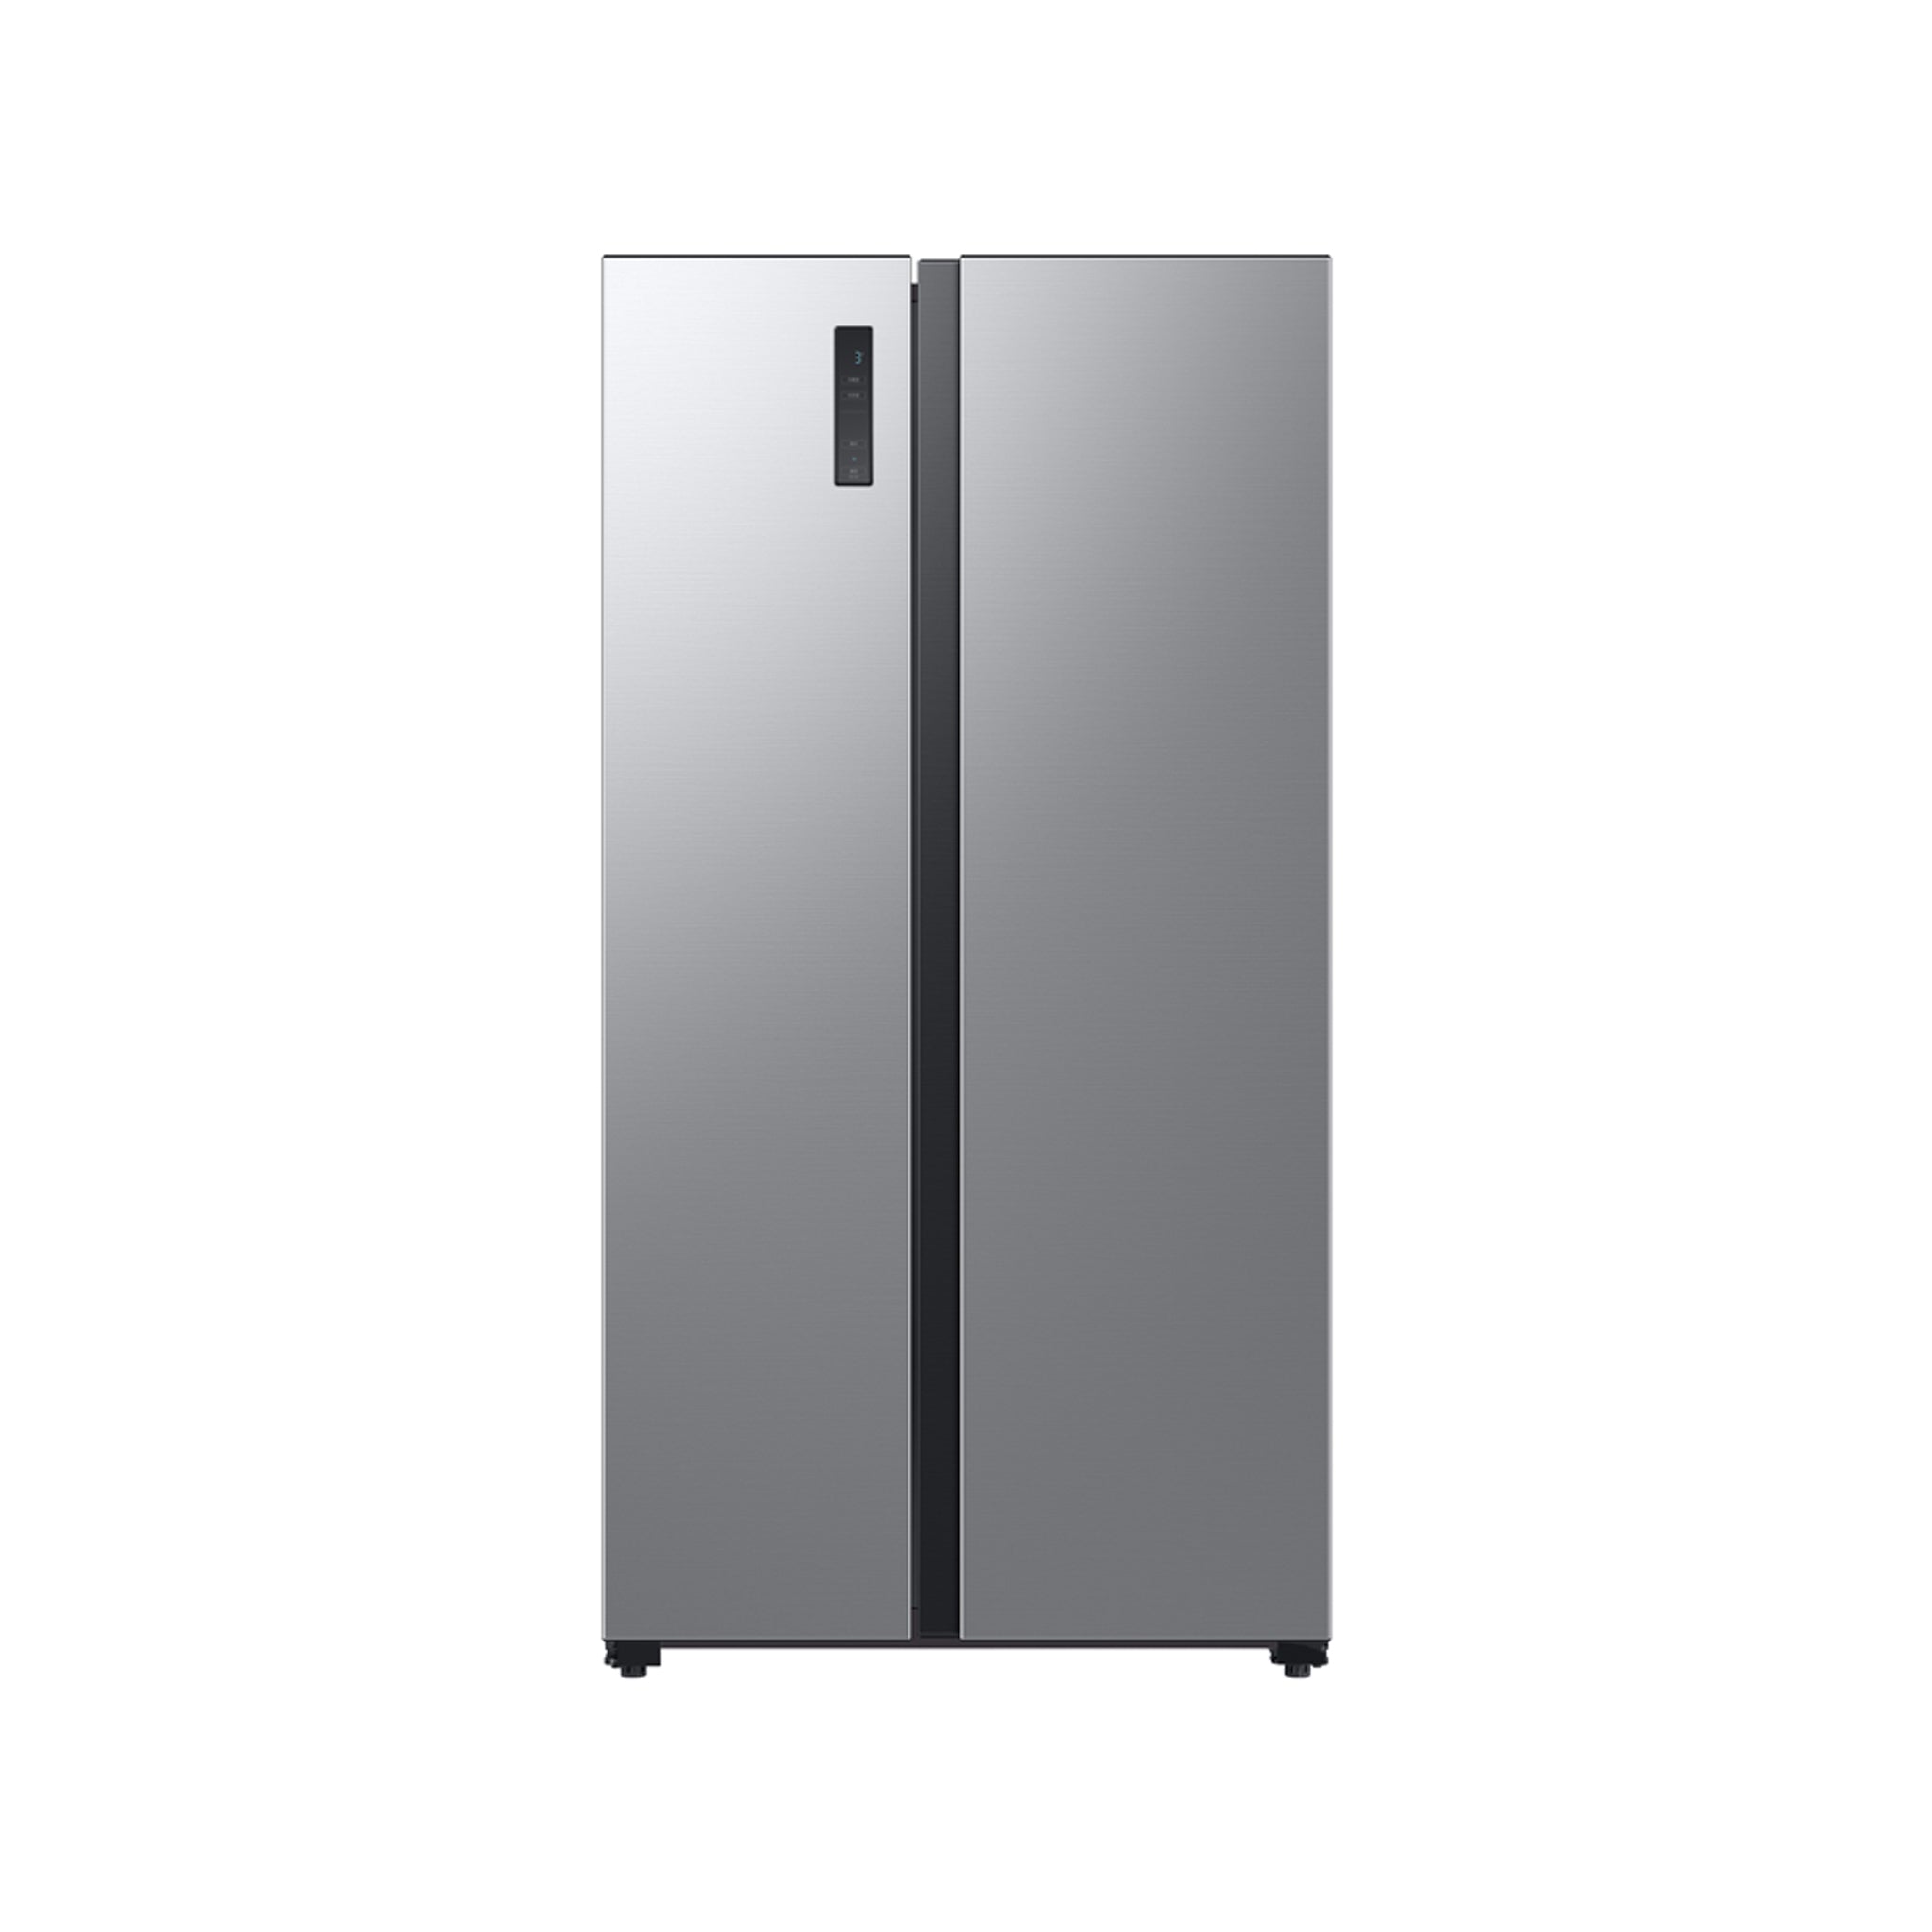 SAMSUNG RS52B3000M9/TC 19.6 cu.ft Side by Side No-Frost Refrigerator Samsung